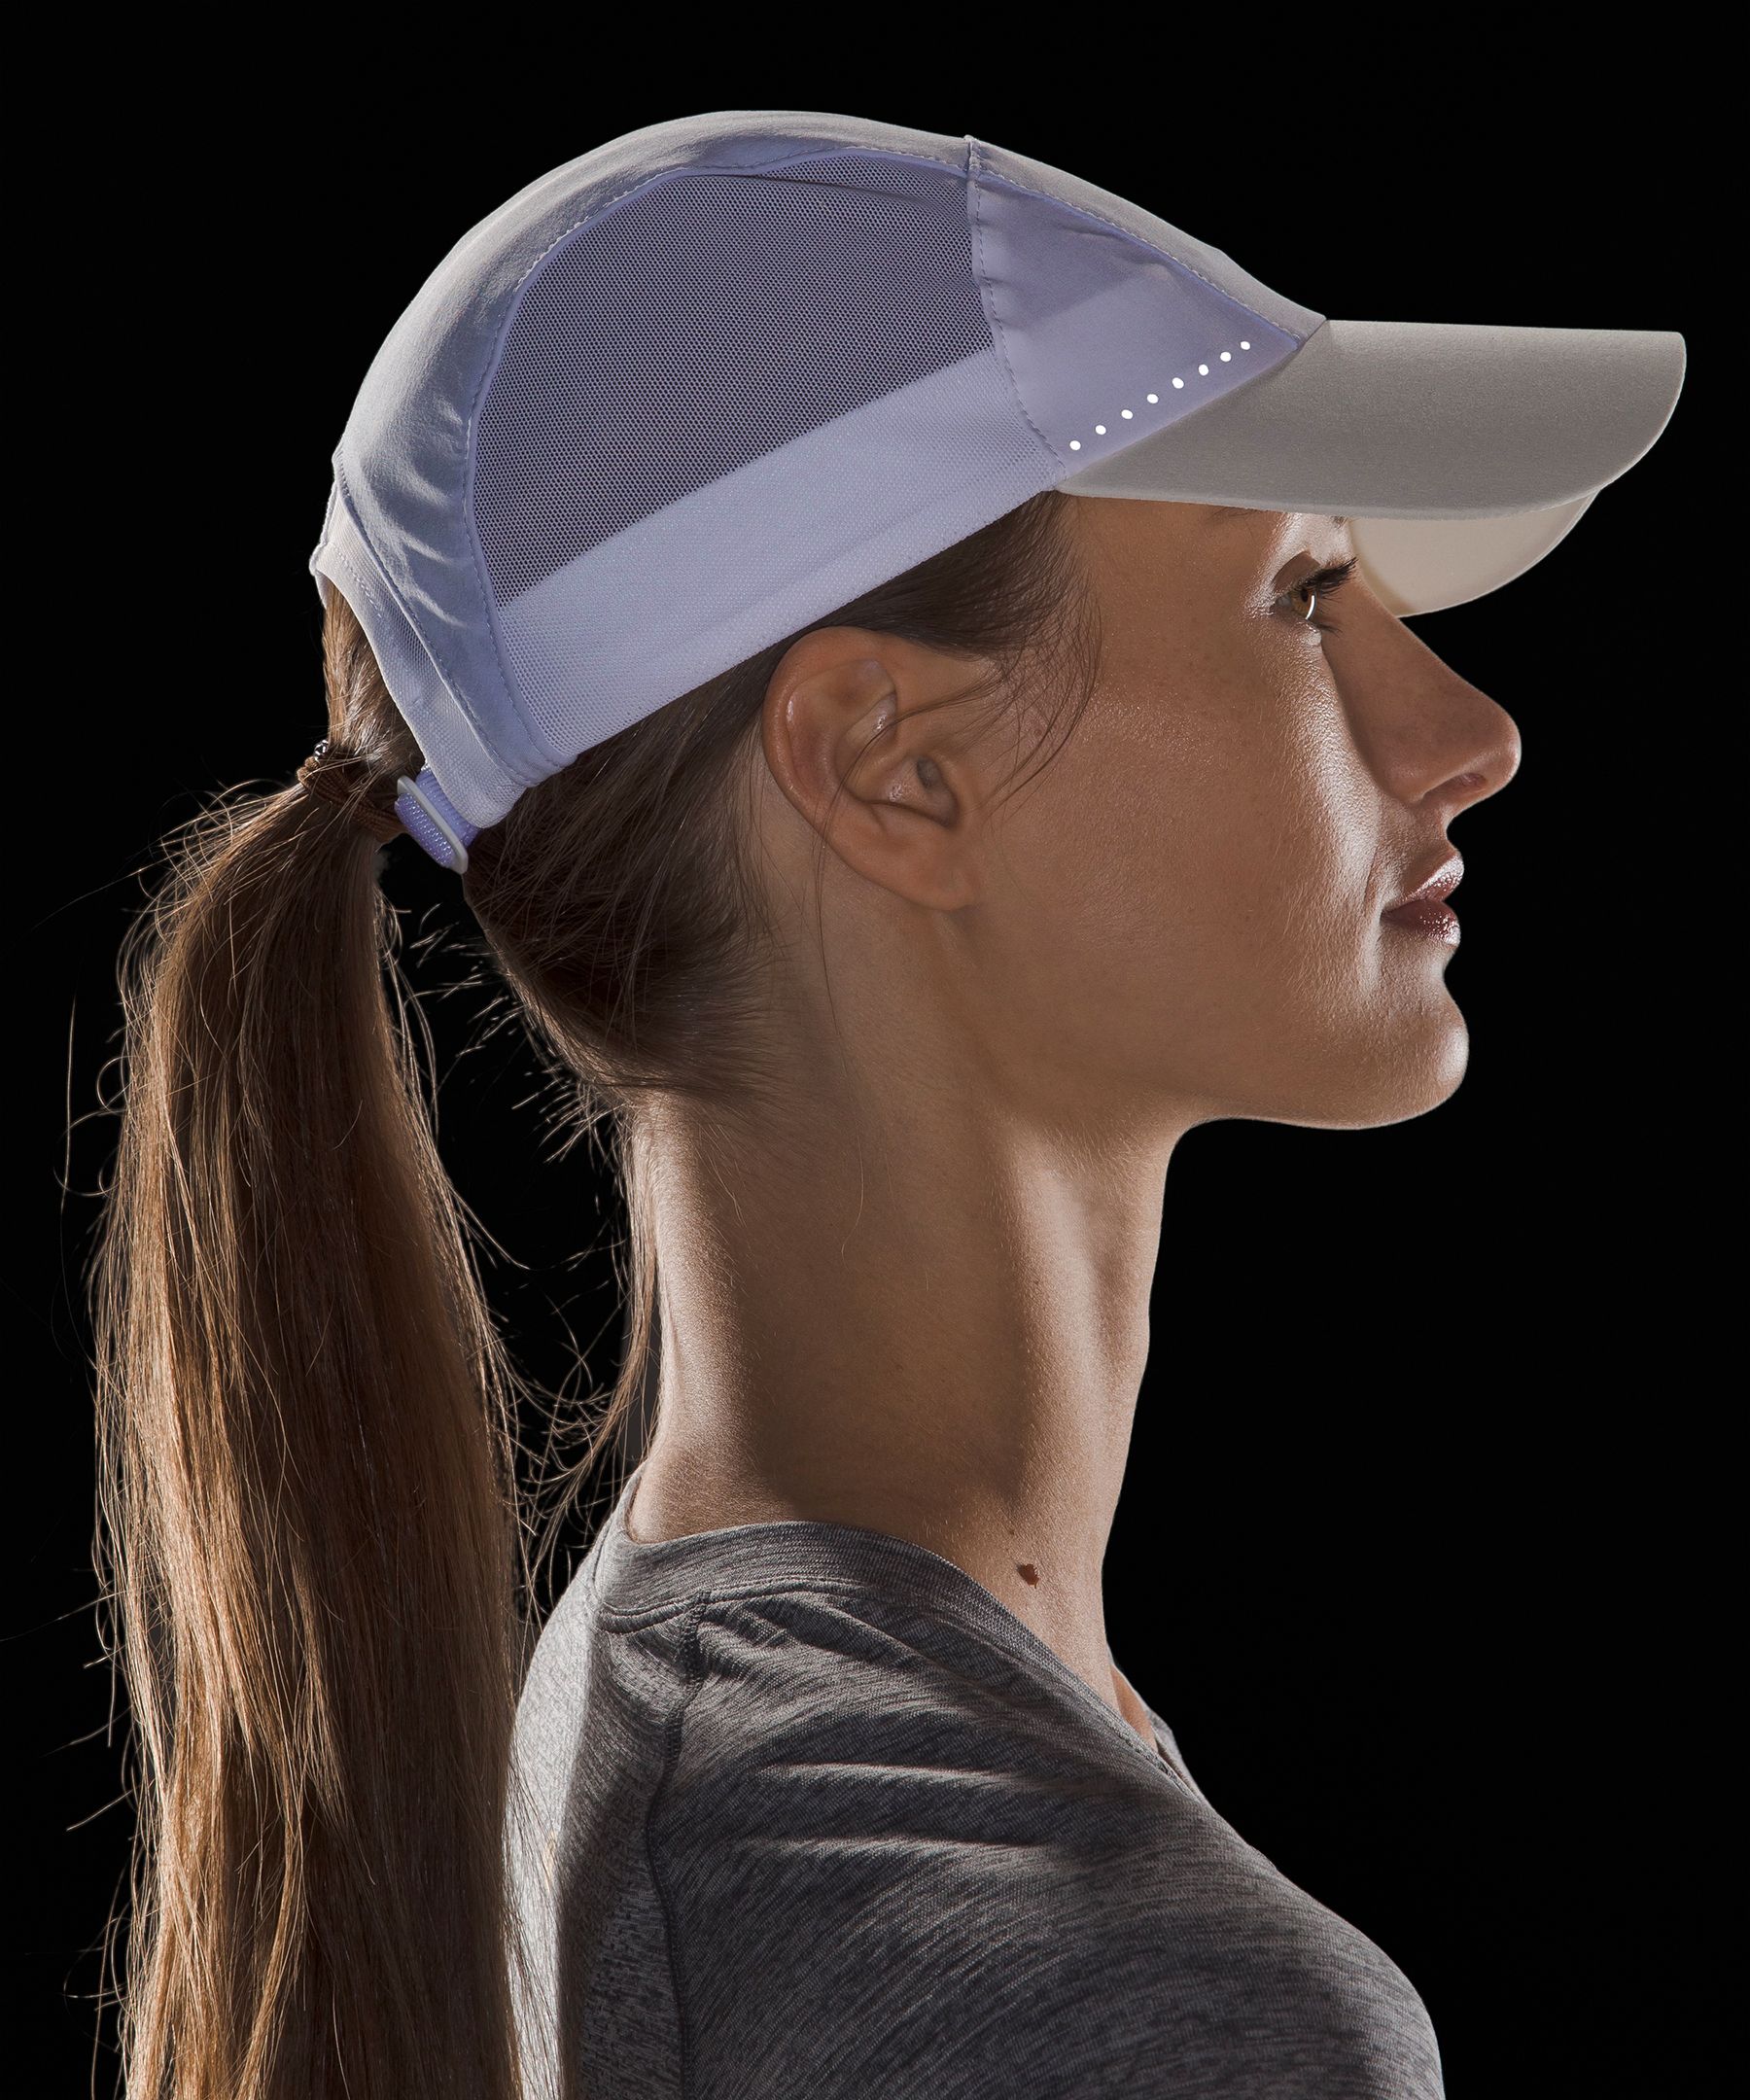 Lululemon Women's Fast and Free Running Hat Elite *Online Only. 4